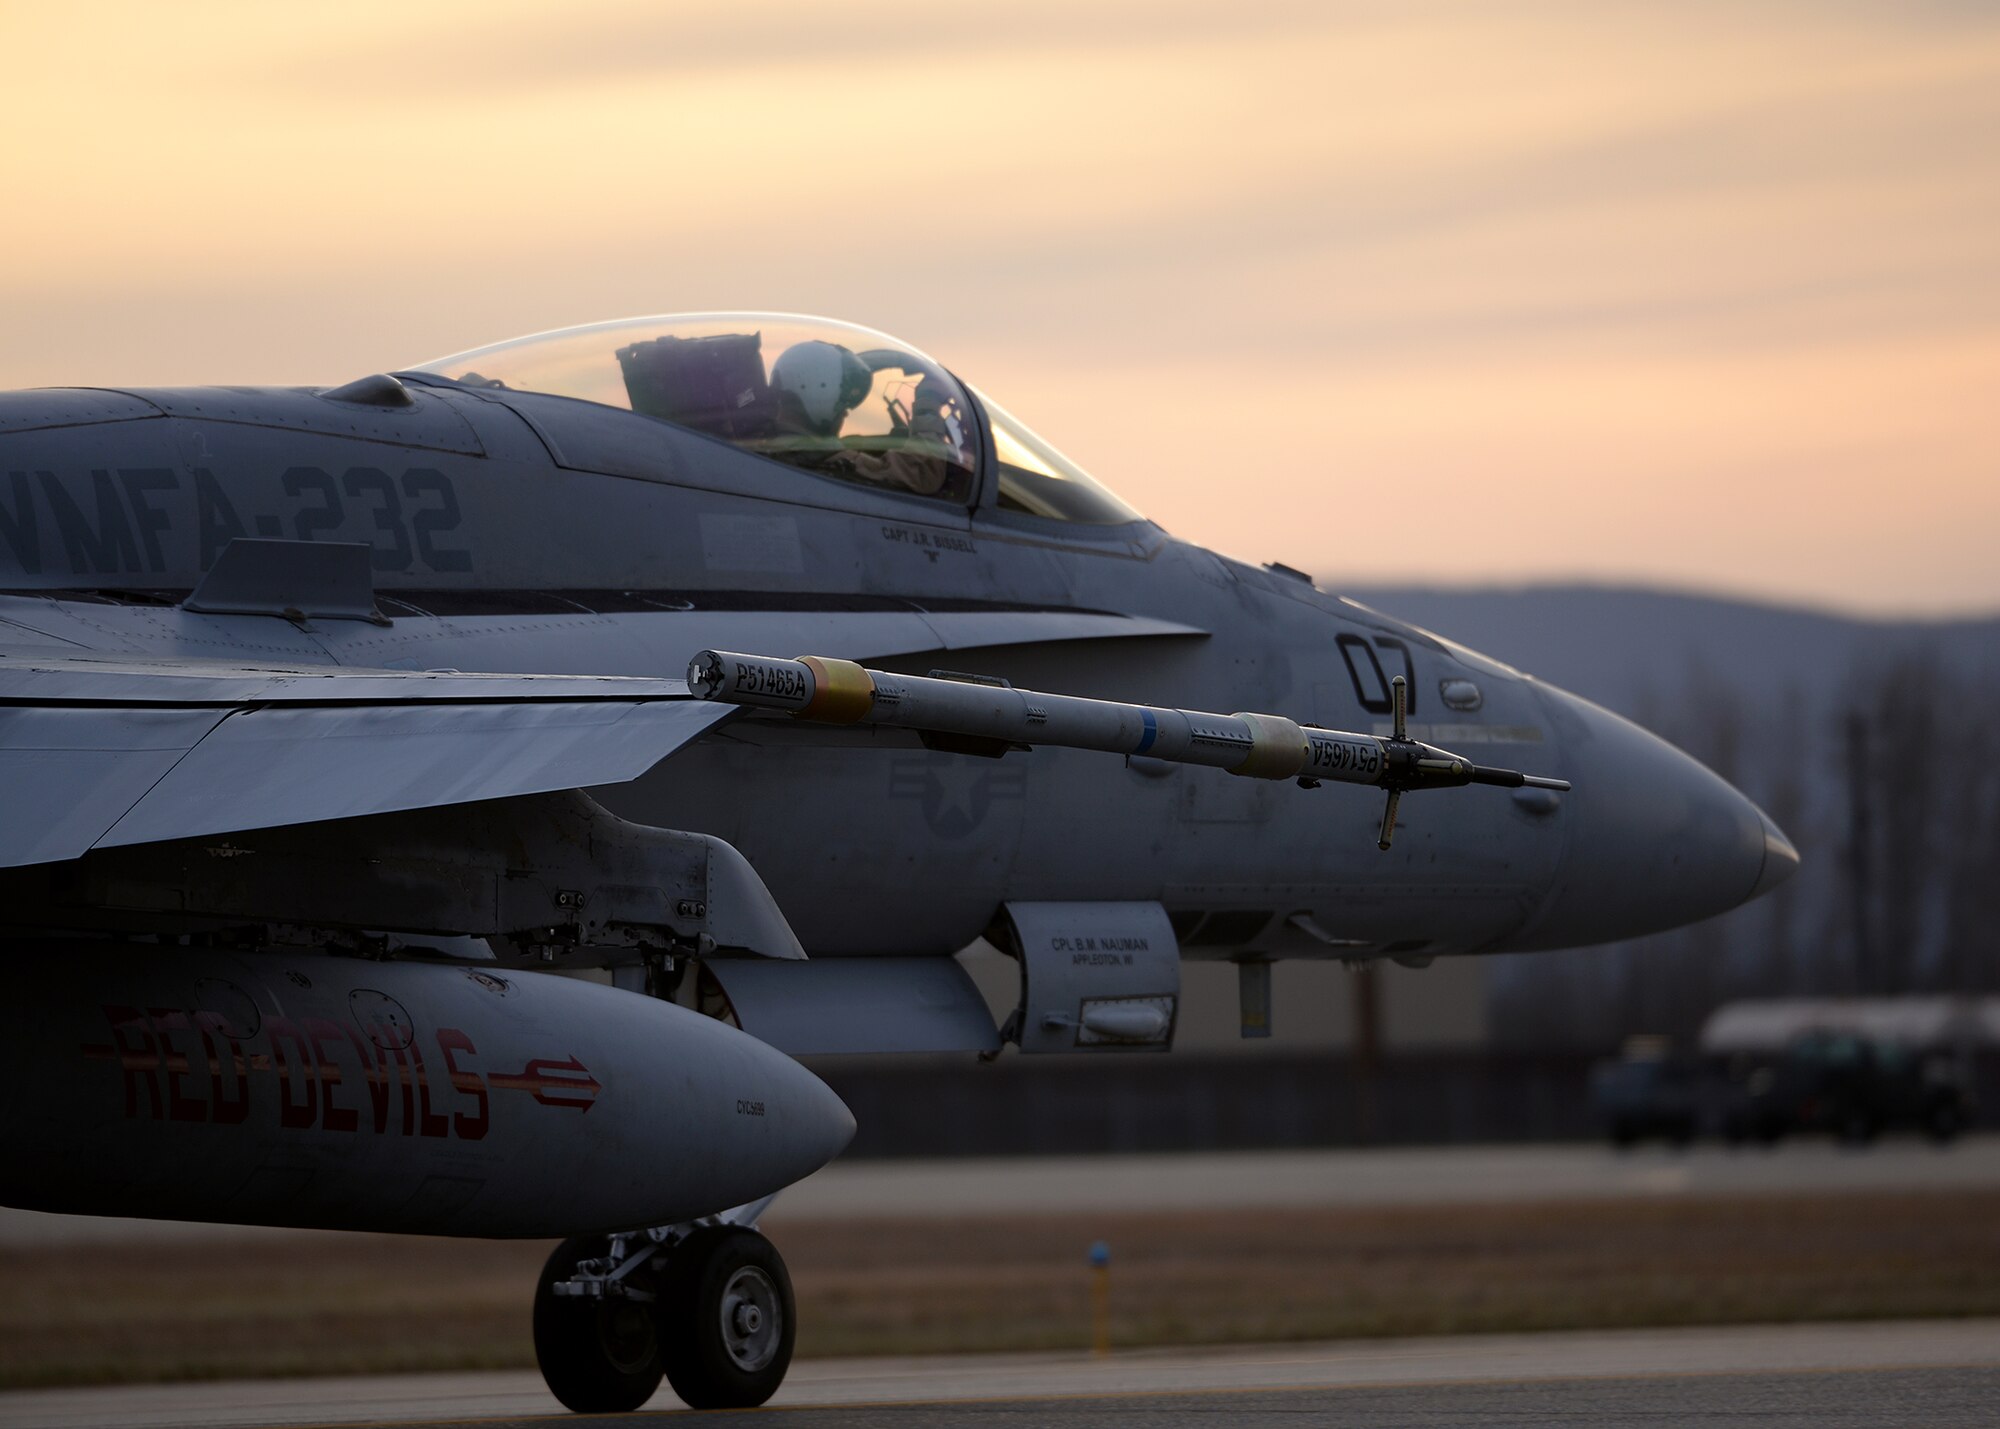 A pilot assigned to Marine Fighter Attack Squadron (VMFA) 232 out of Marine Corps Air Station Miramar, Calif., taxis his F/A-18C Hornet aircraft down the Eielson Air Force Base, Alaska, flight line as the sun rises Oct. 10, 2016, during RED FLAG-Alaska (RF-A) 17-1. RF-A is a series of Pacific Air Forces commander-directed field training exercises for U.S. and partner nation forces, which enables U.S. Marines in units like VMFA-232 to prepare for future combat and contingency operations in a realistic threat environment inside the largest instrumented air, ground and electronic combat training range in the world. (U.S. Air Force photo by Master Sgt. Karen J. Tomasik)